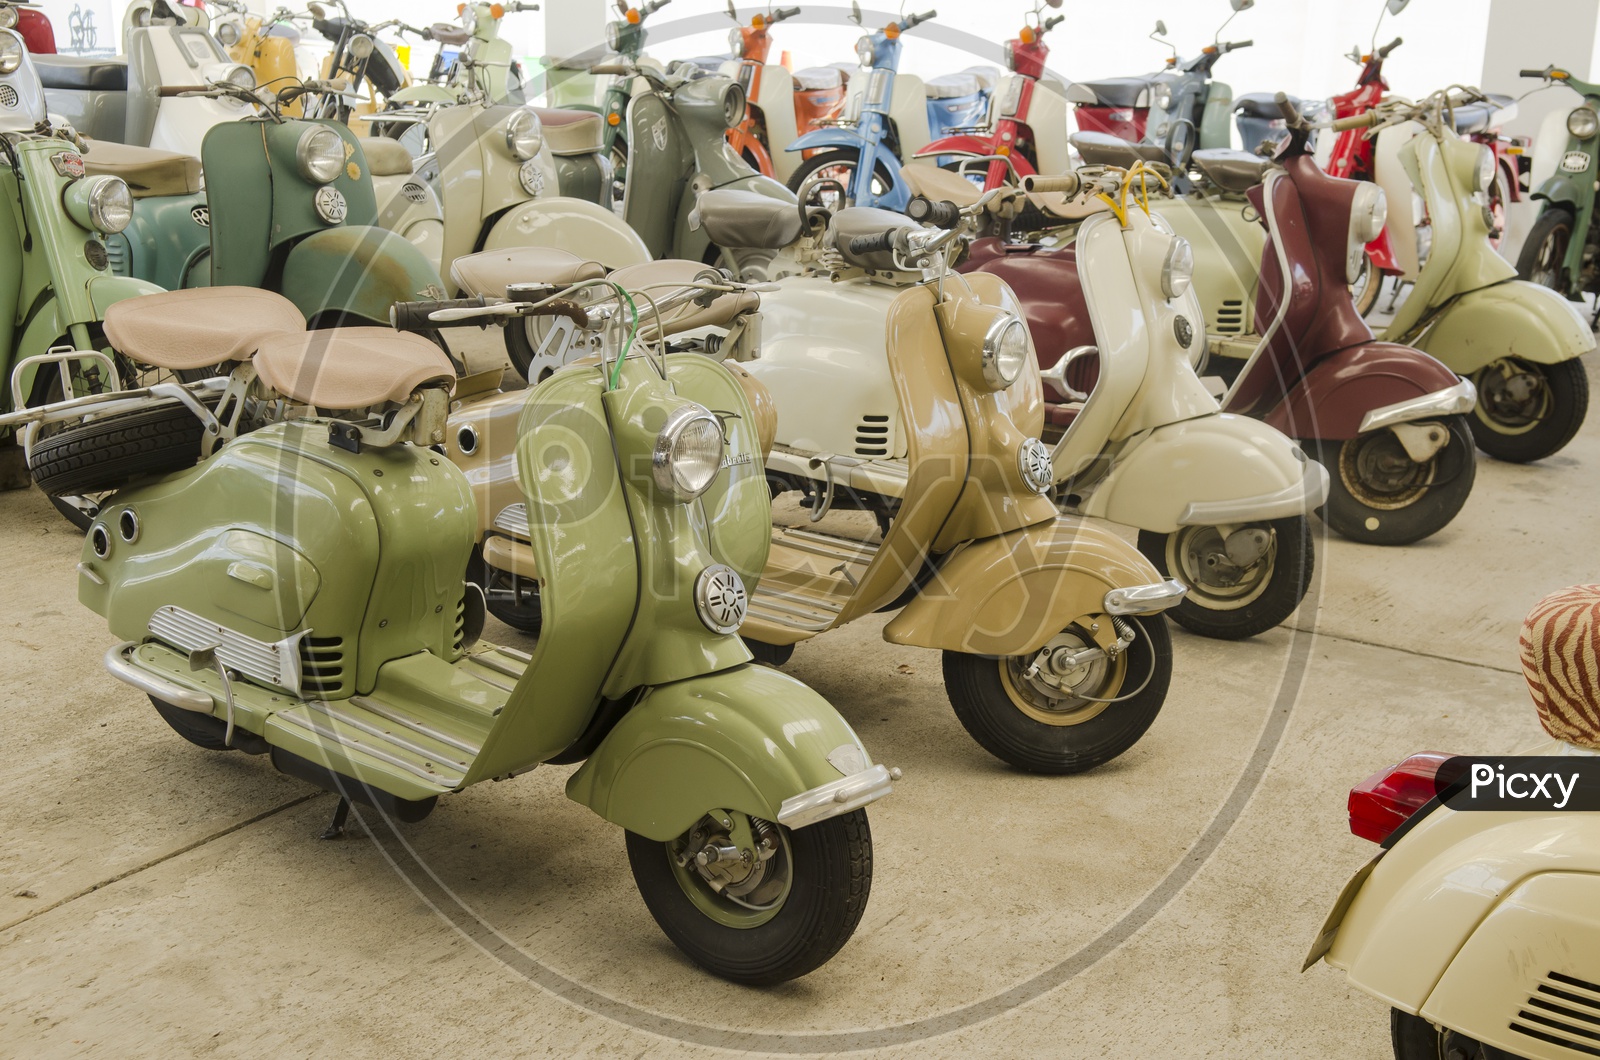 Vintage Scooters in Expo